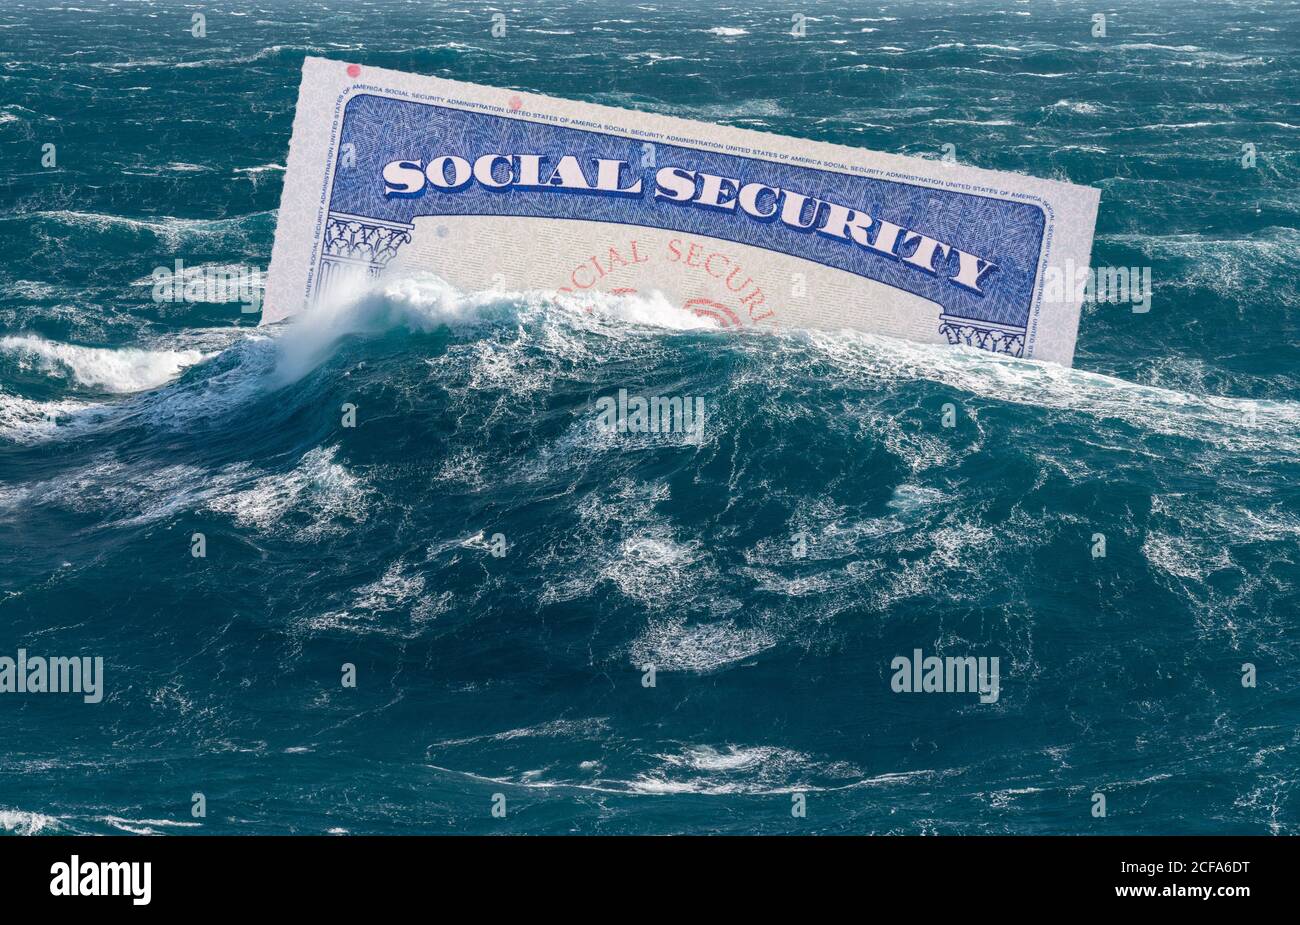 Social Security card sinking underwater in stormy seas as concept for issues around funding of USA pensions to seniors Stock Photo